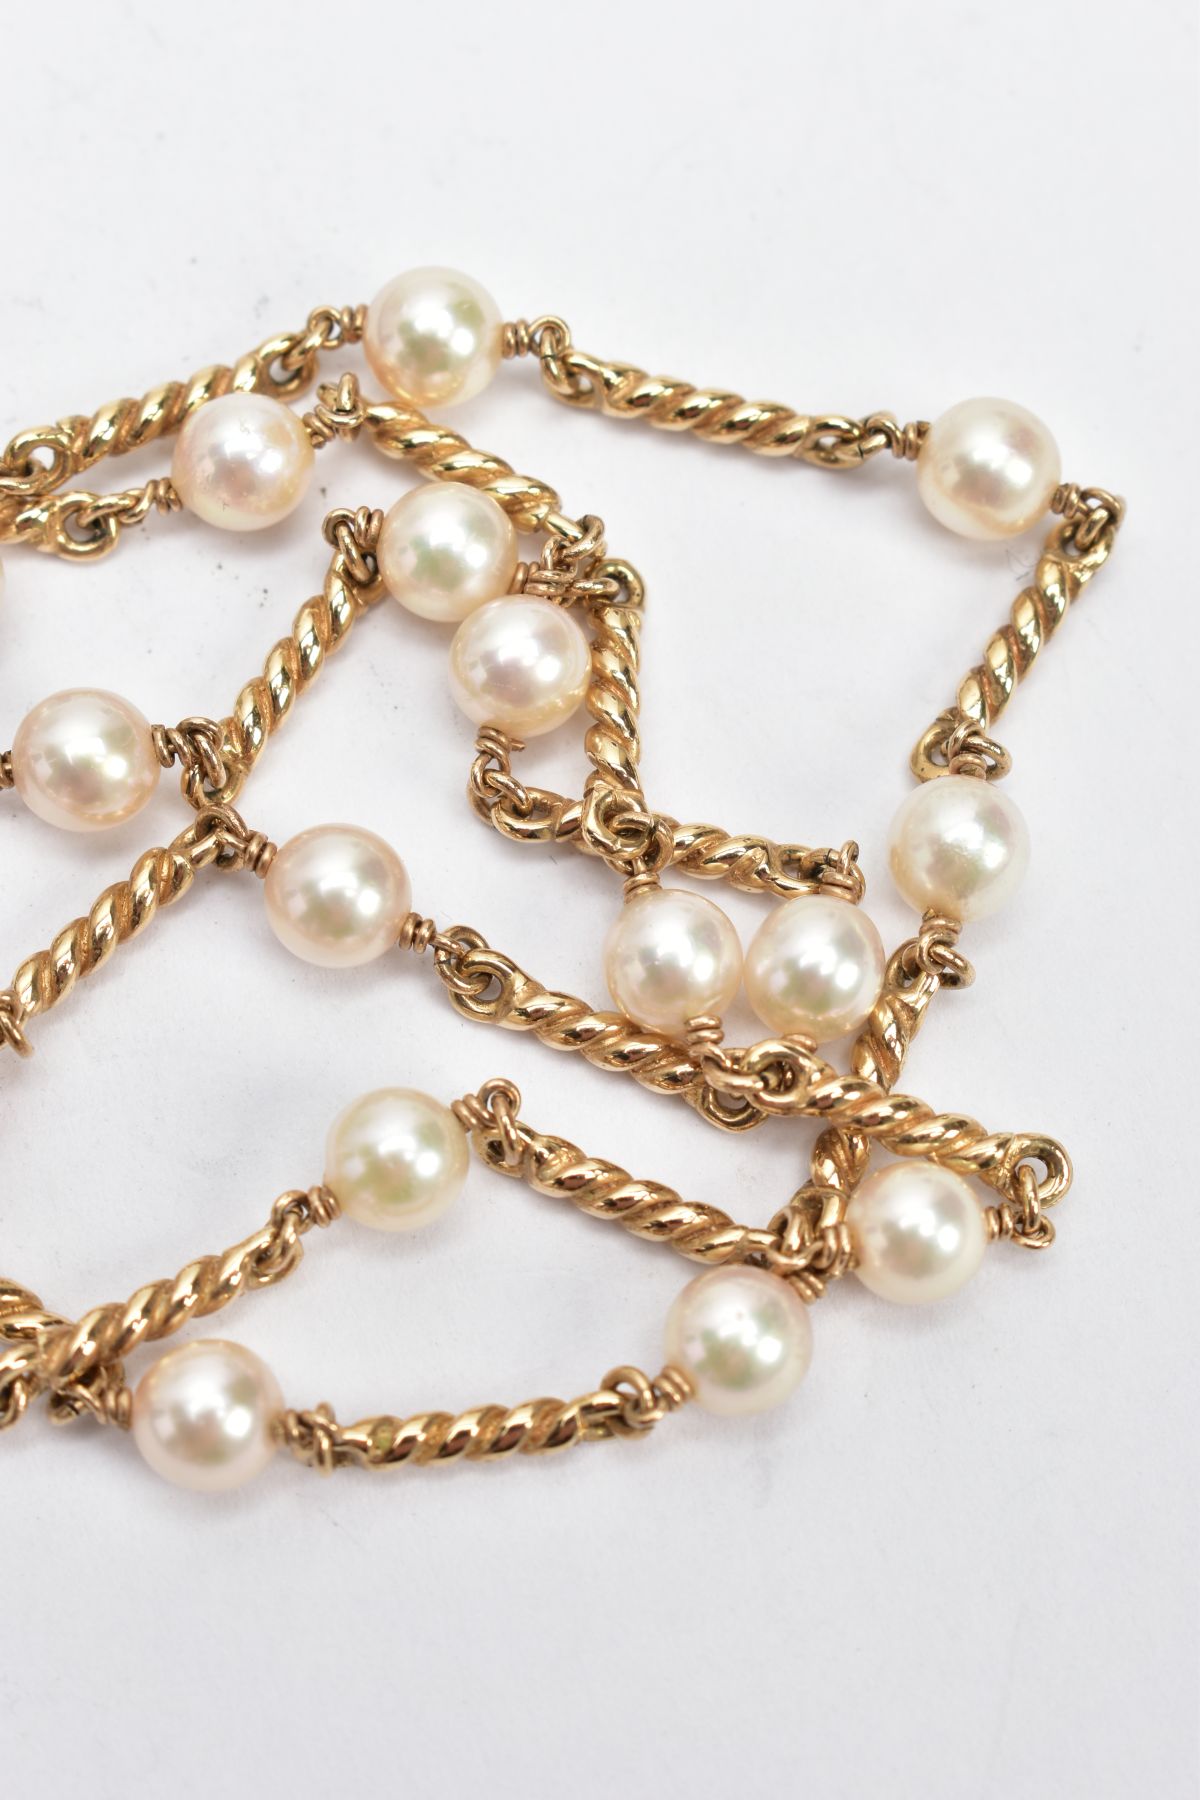 A 9CT GOLD CULTURED PEARL NECKLACE, twenty three white cultured pearls, each pearl approximately - Image 3 of 6